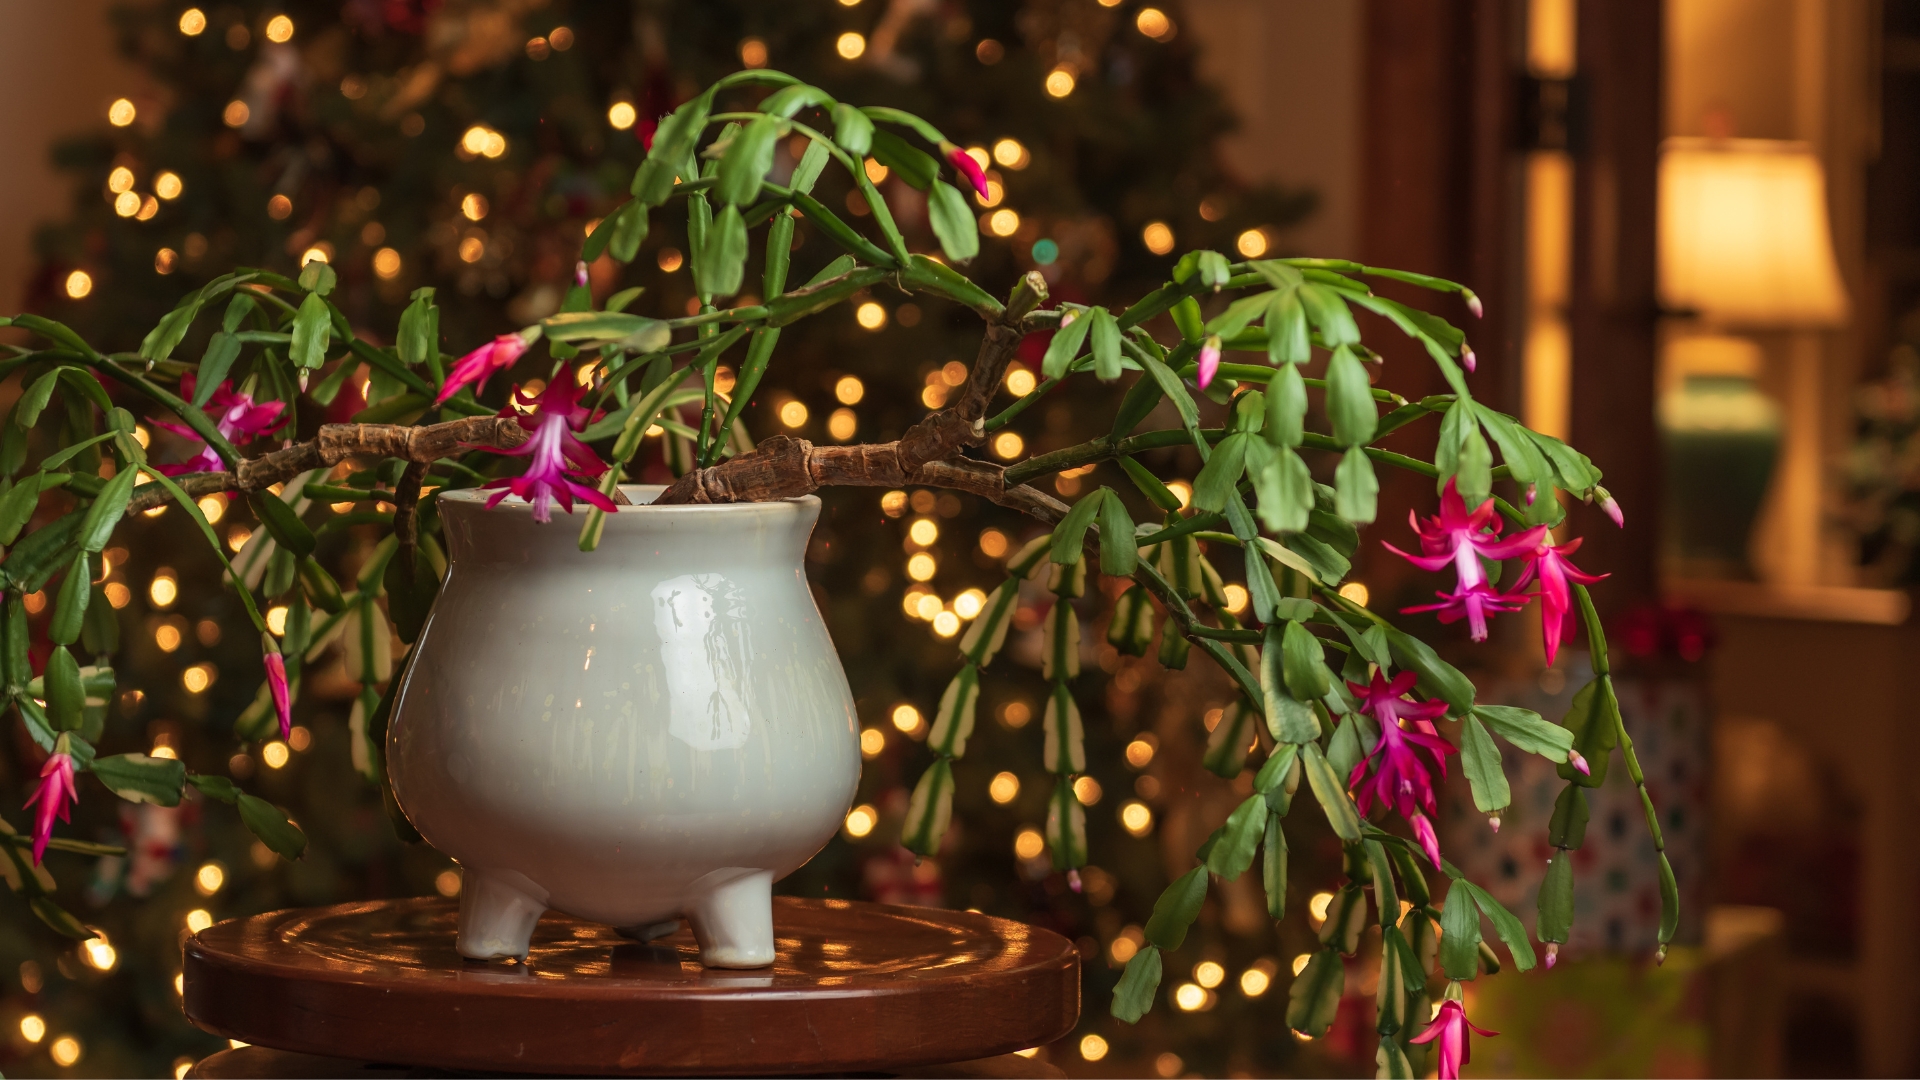 Should You Keep Your Christmas Cactus In The Dark